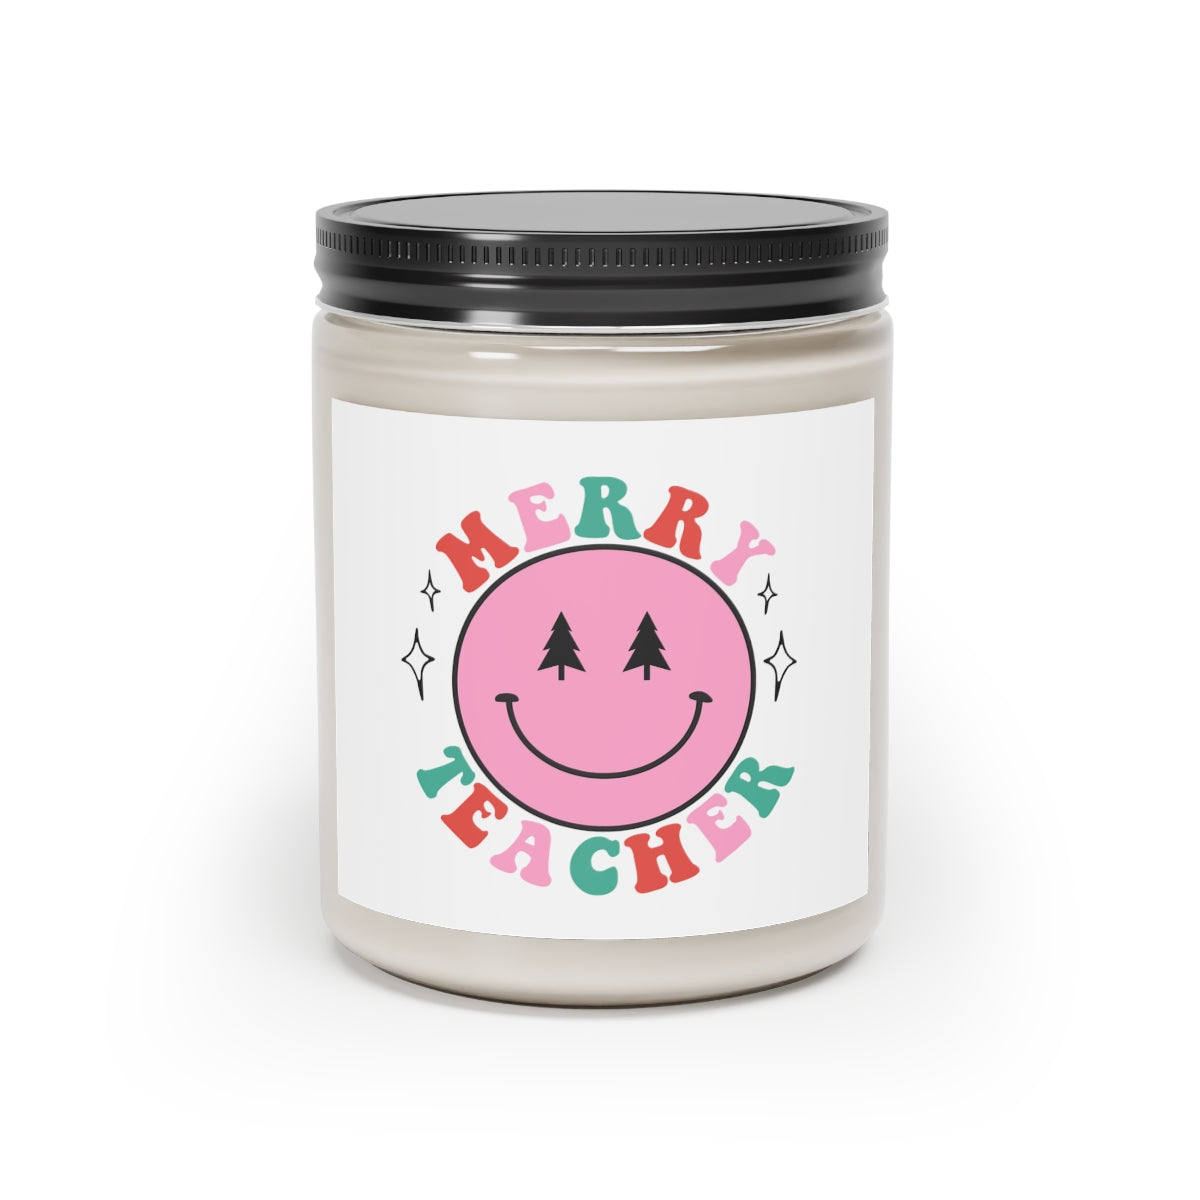 Merry Teacher Scented Candle